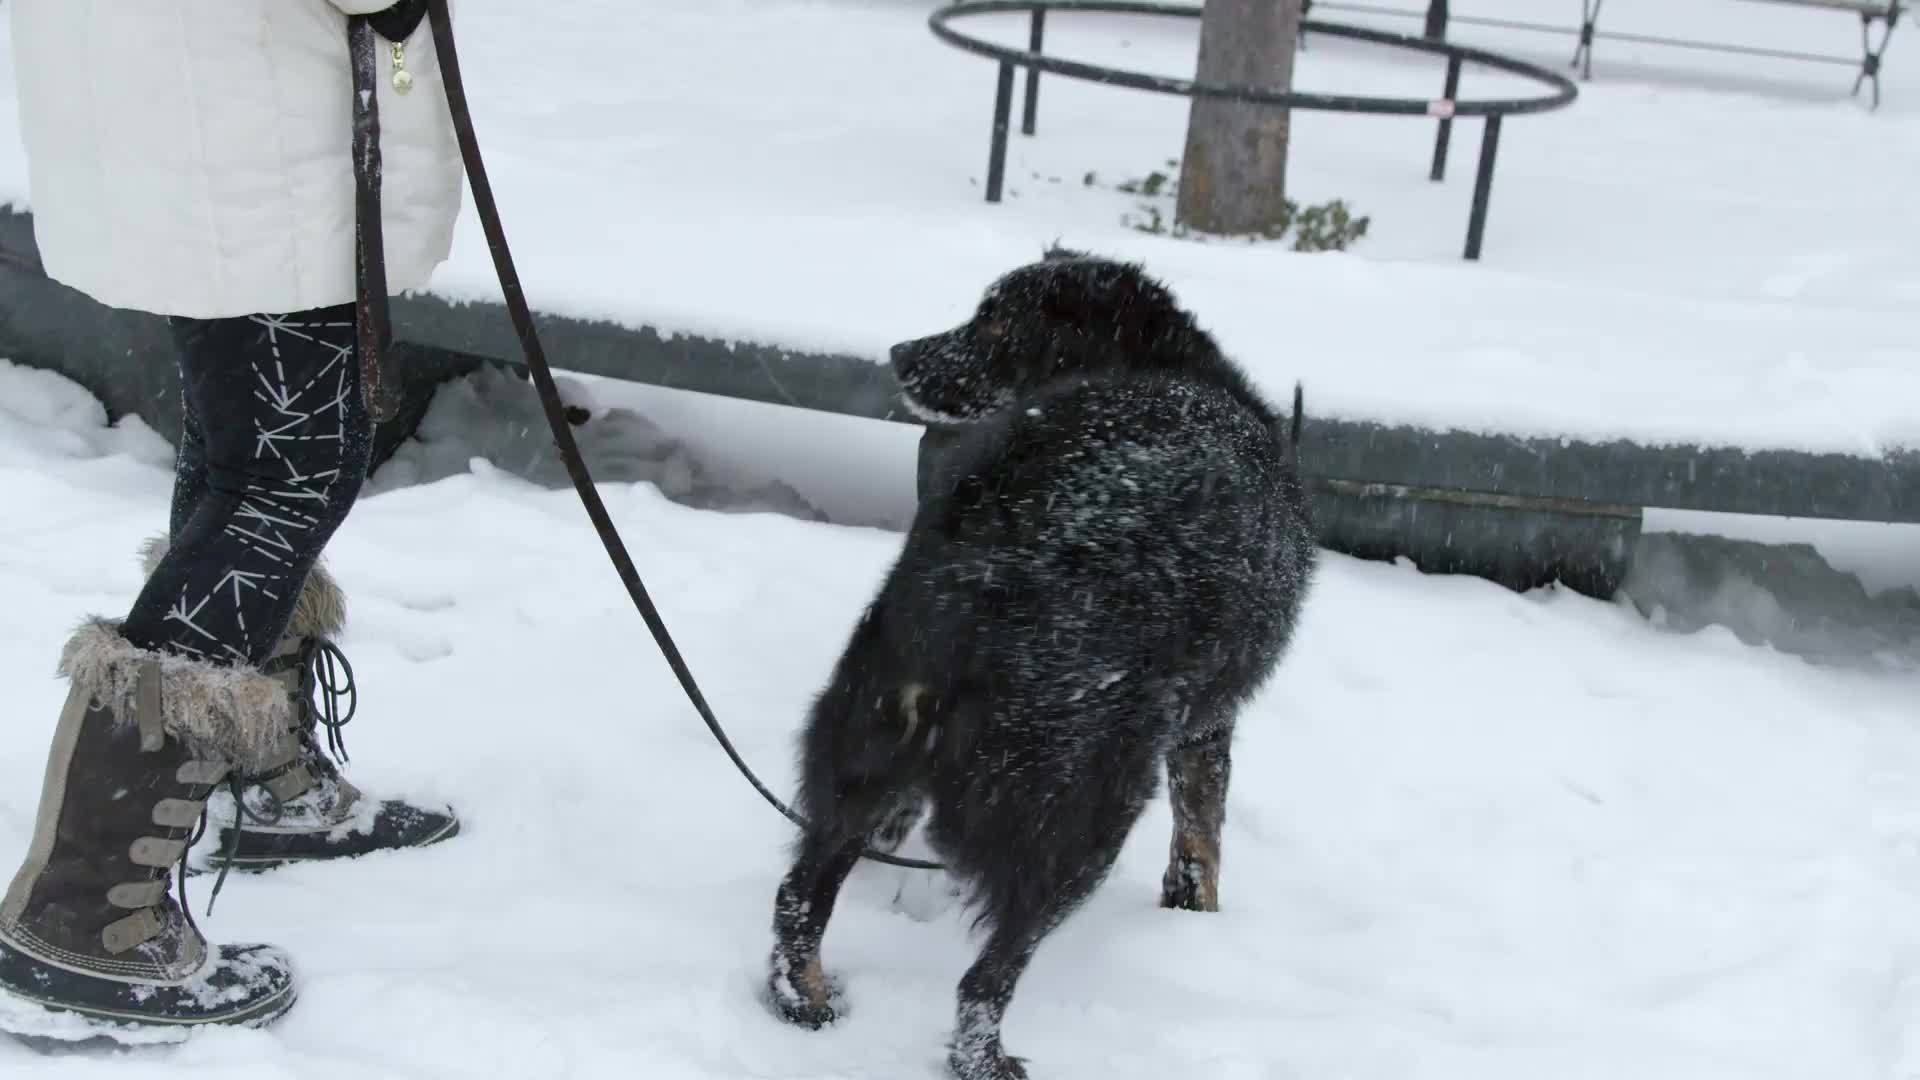 black collie dog on leash jumping in snow with owner in winter blizzard - snowing in park